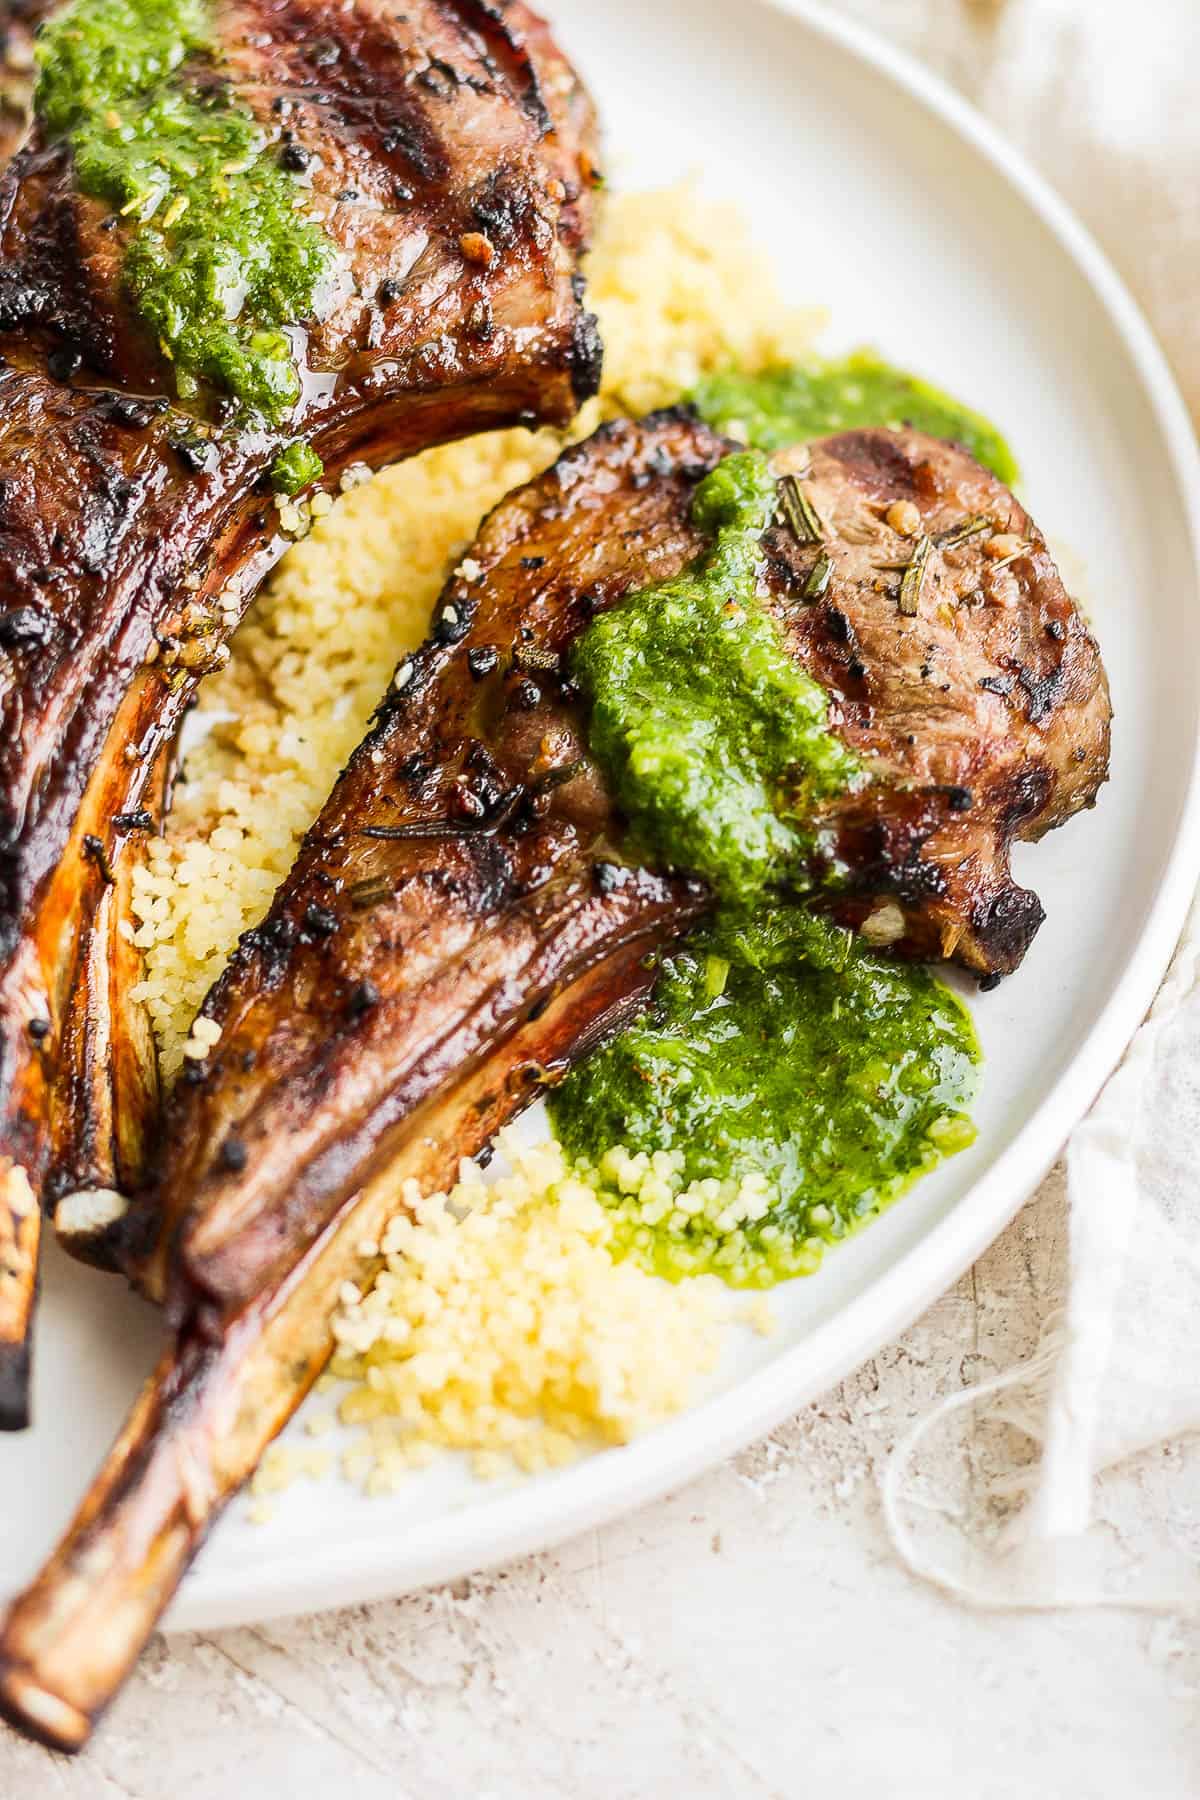 A close up of a grilled lamb chop on a bed of lemon coucous drizzled with mint chimichurri.